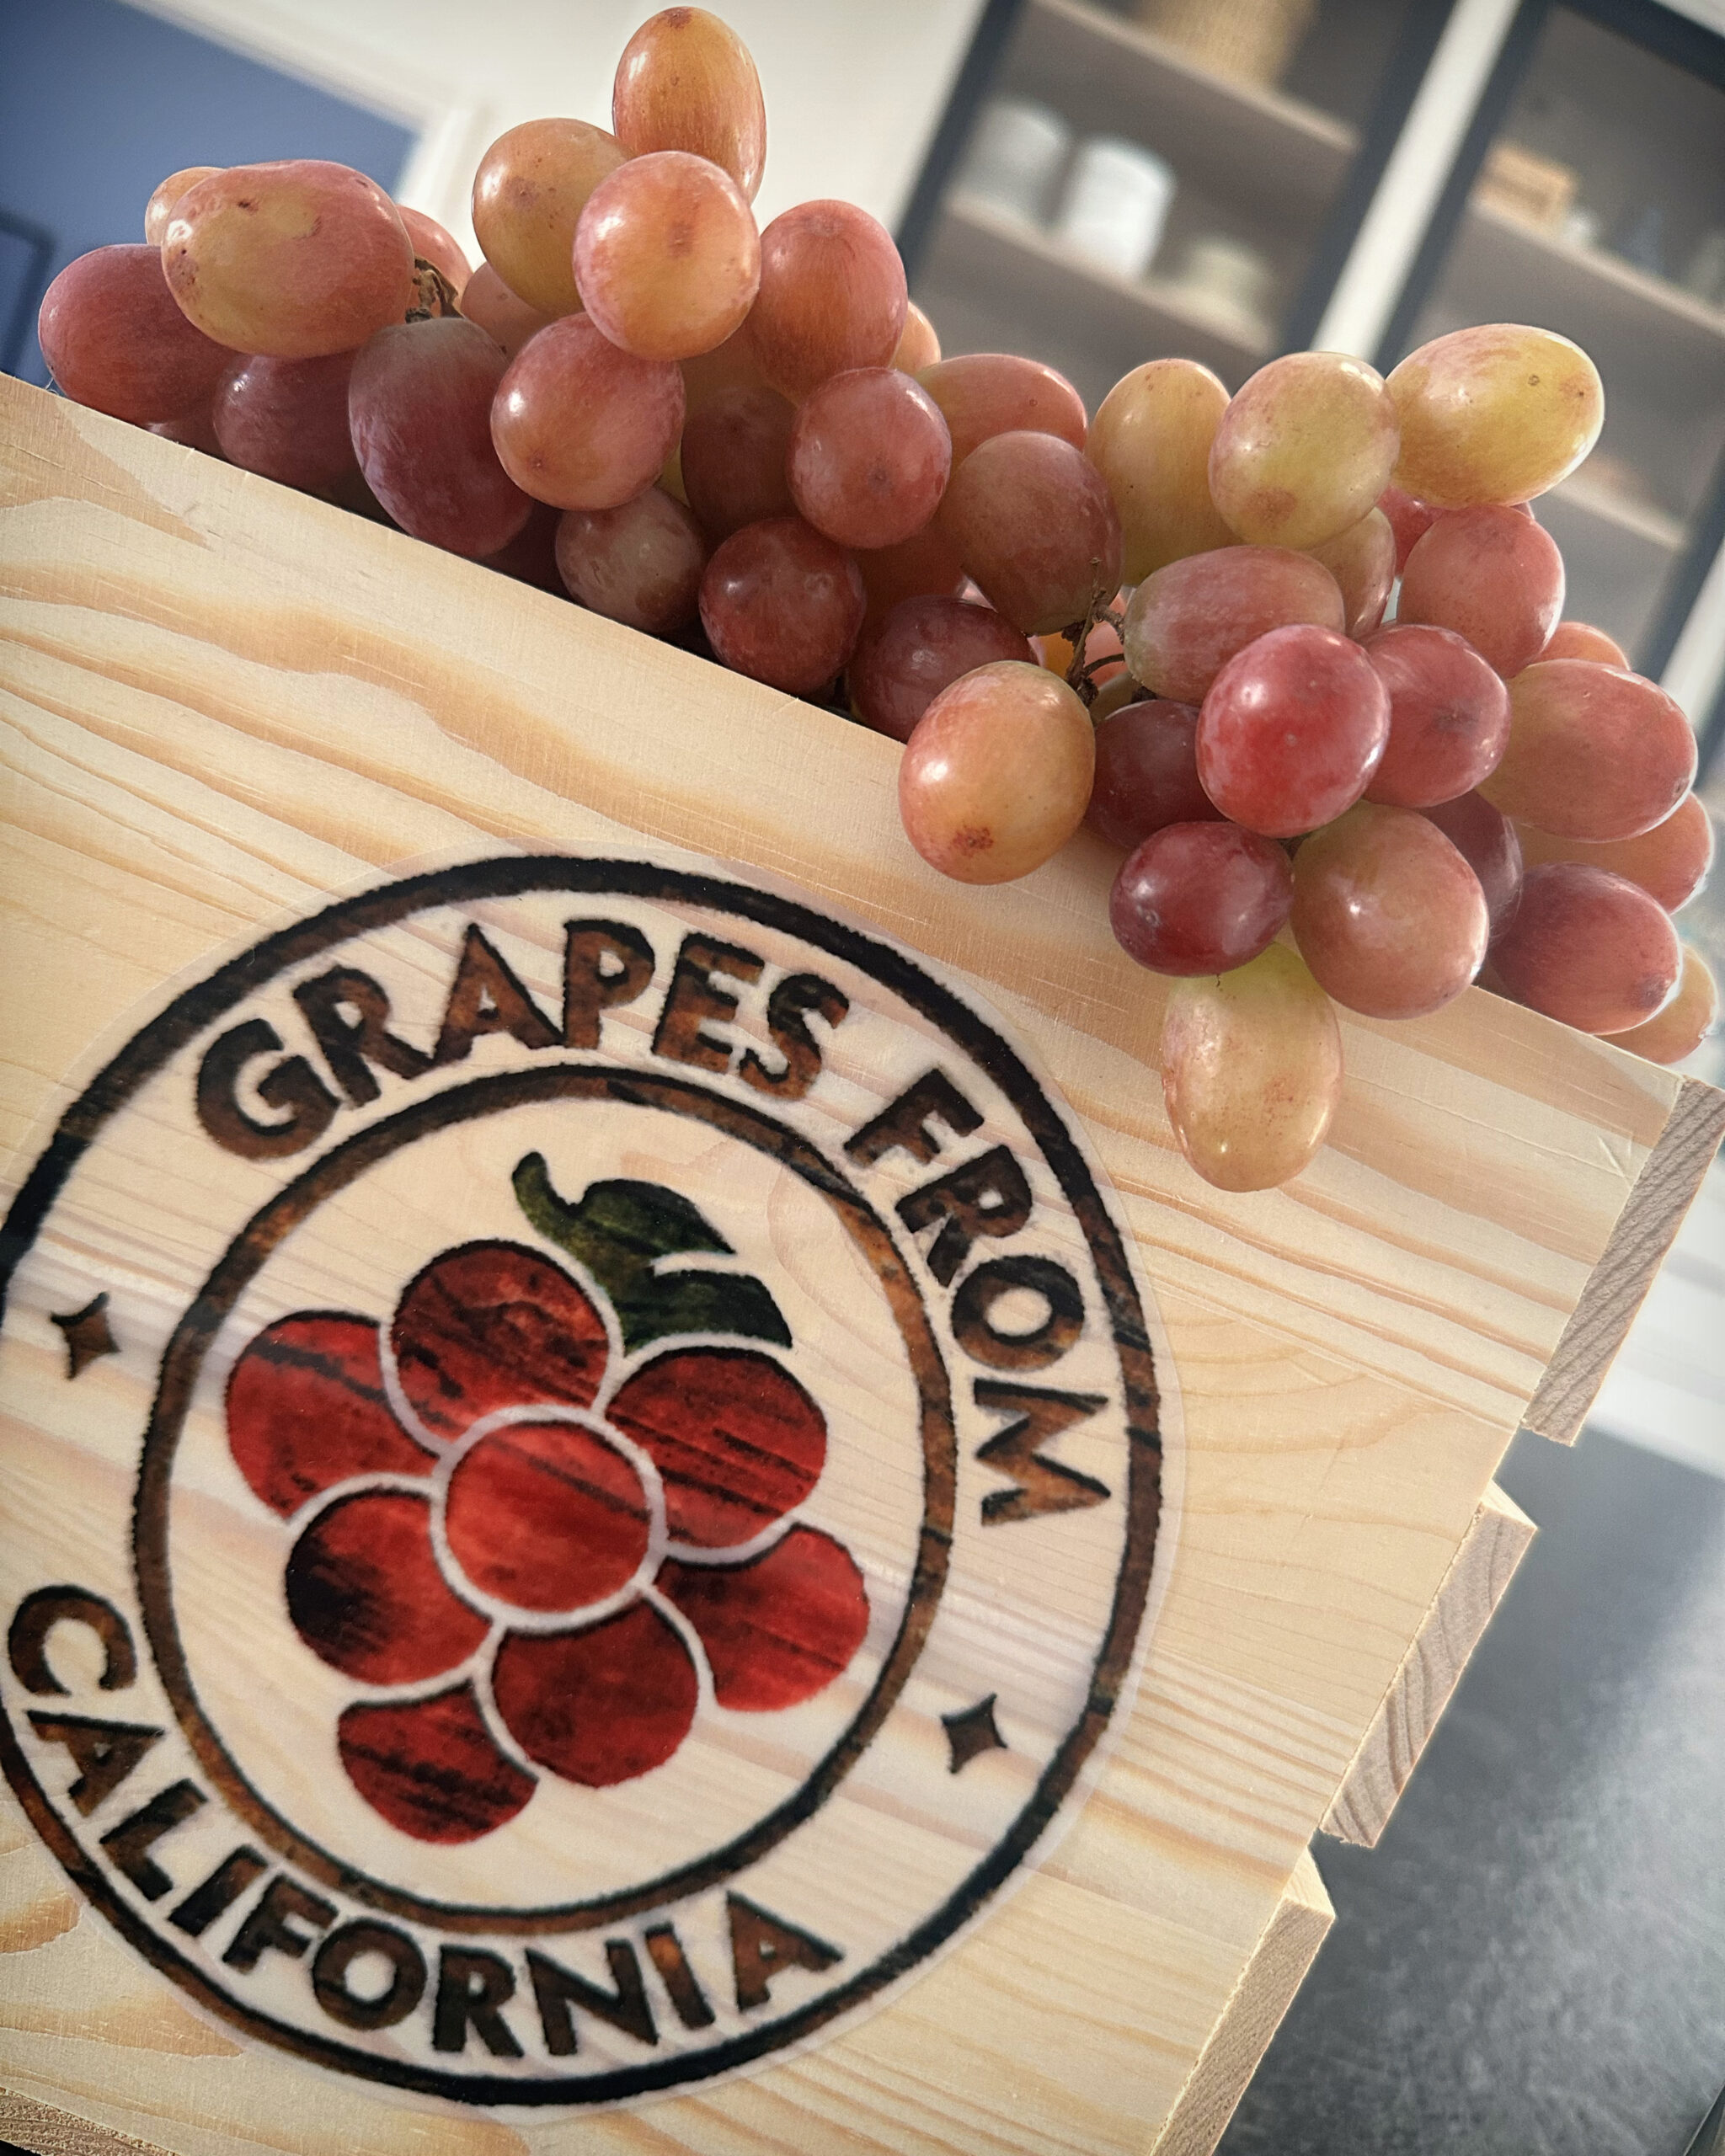 California grapes for the holidays